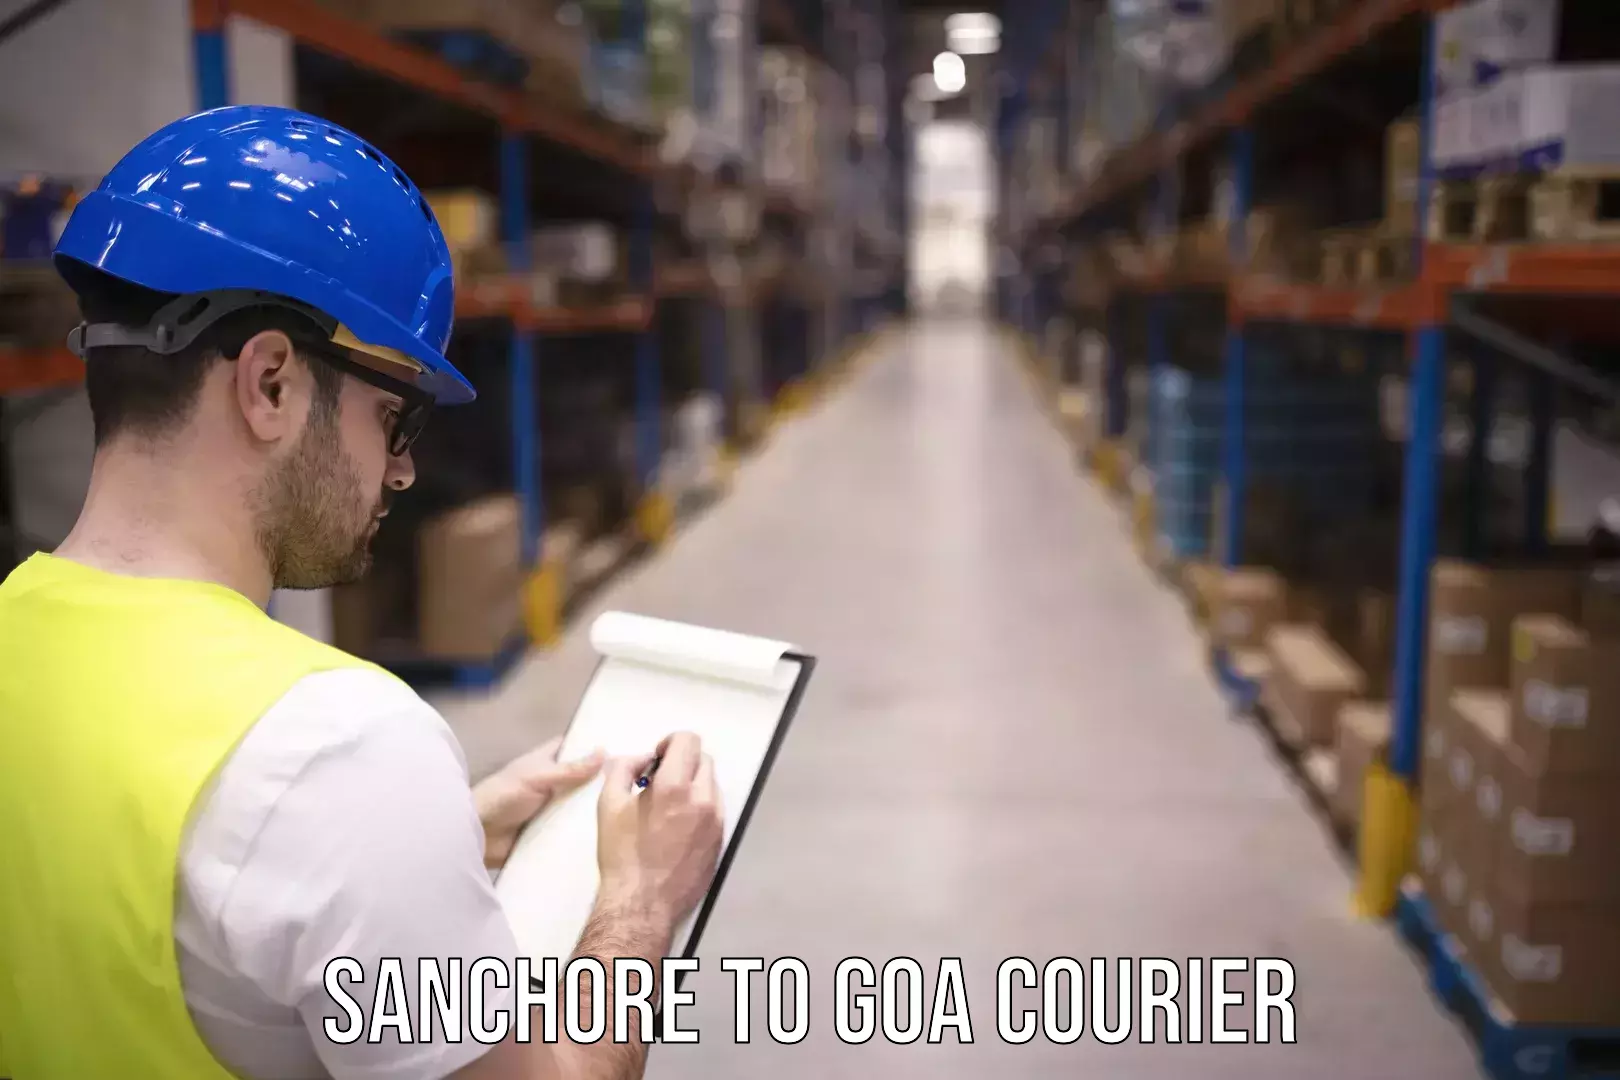 Professional courier handling Sanchore to Goa